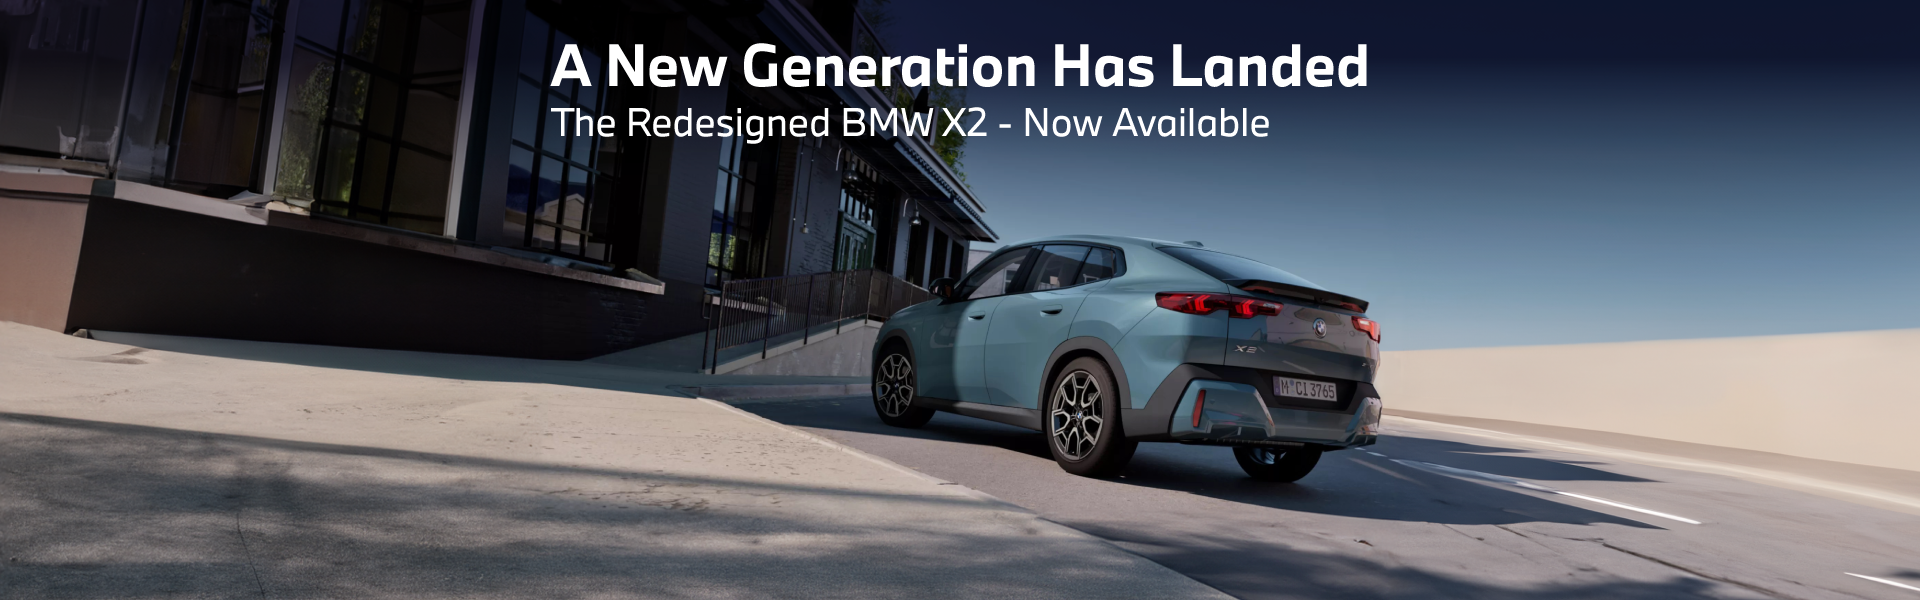 Redesigned BMW X2 - Now Available